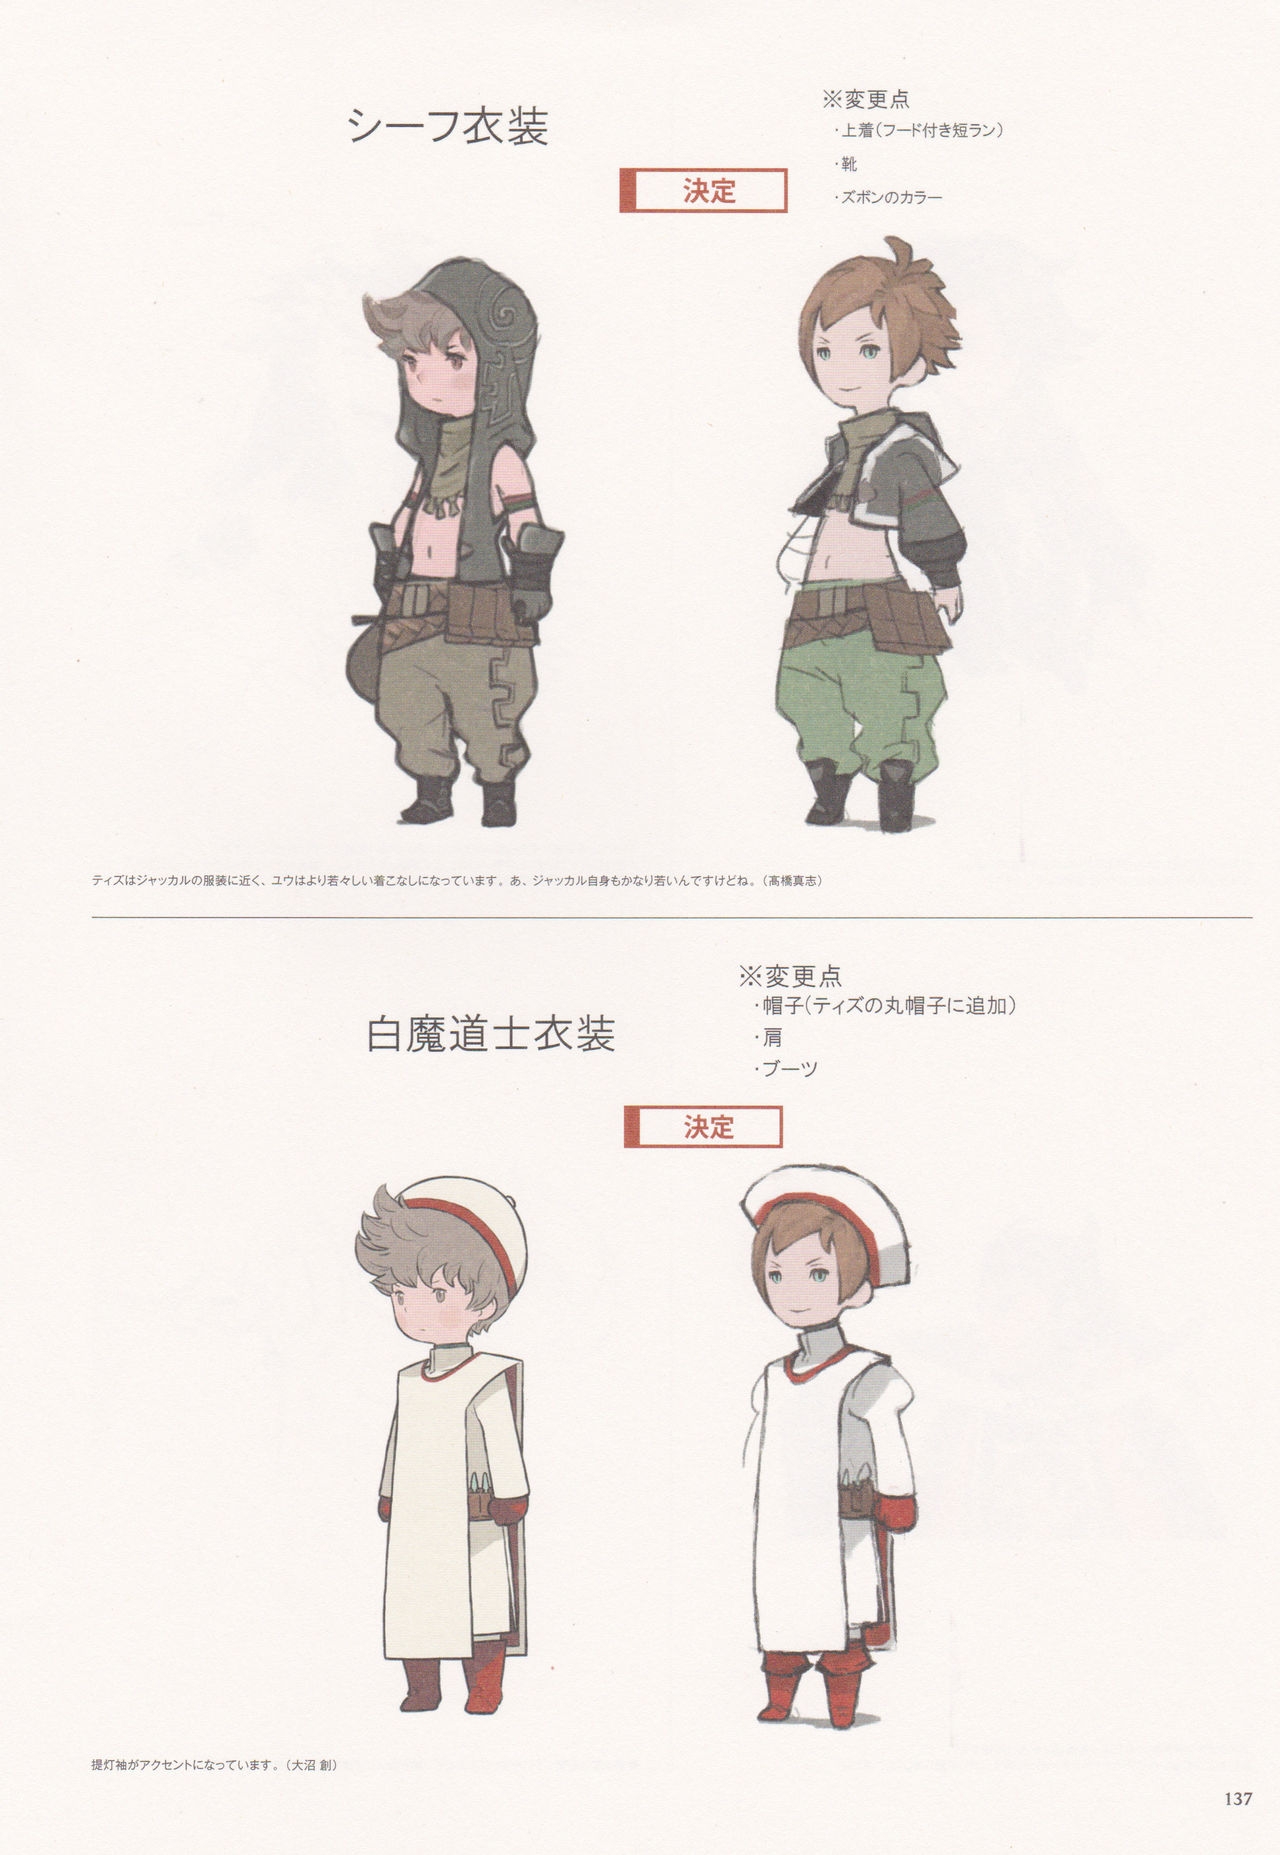 Bravely Second - End Layer - Design Works THE ART OF BRAVELY 2013-2015 137